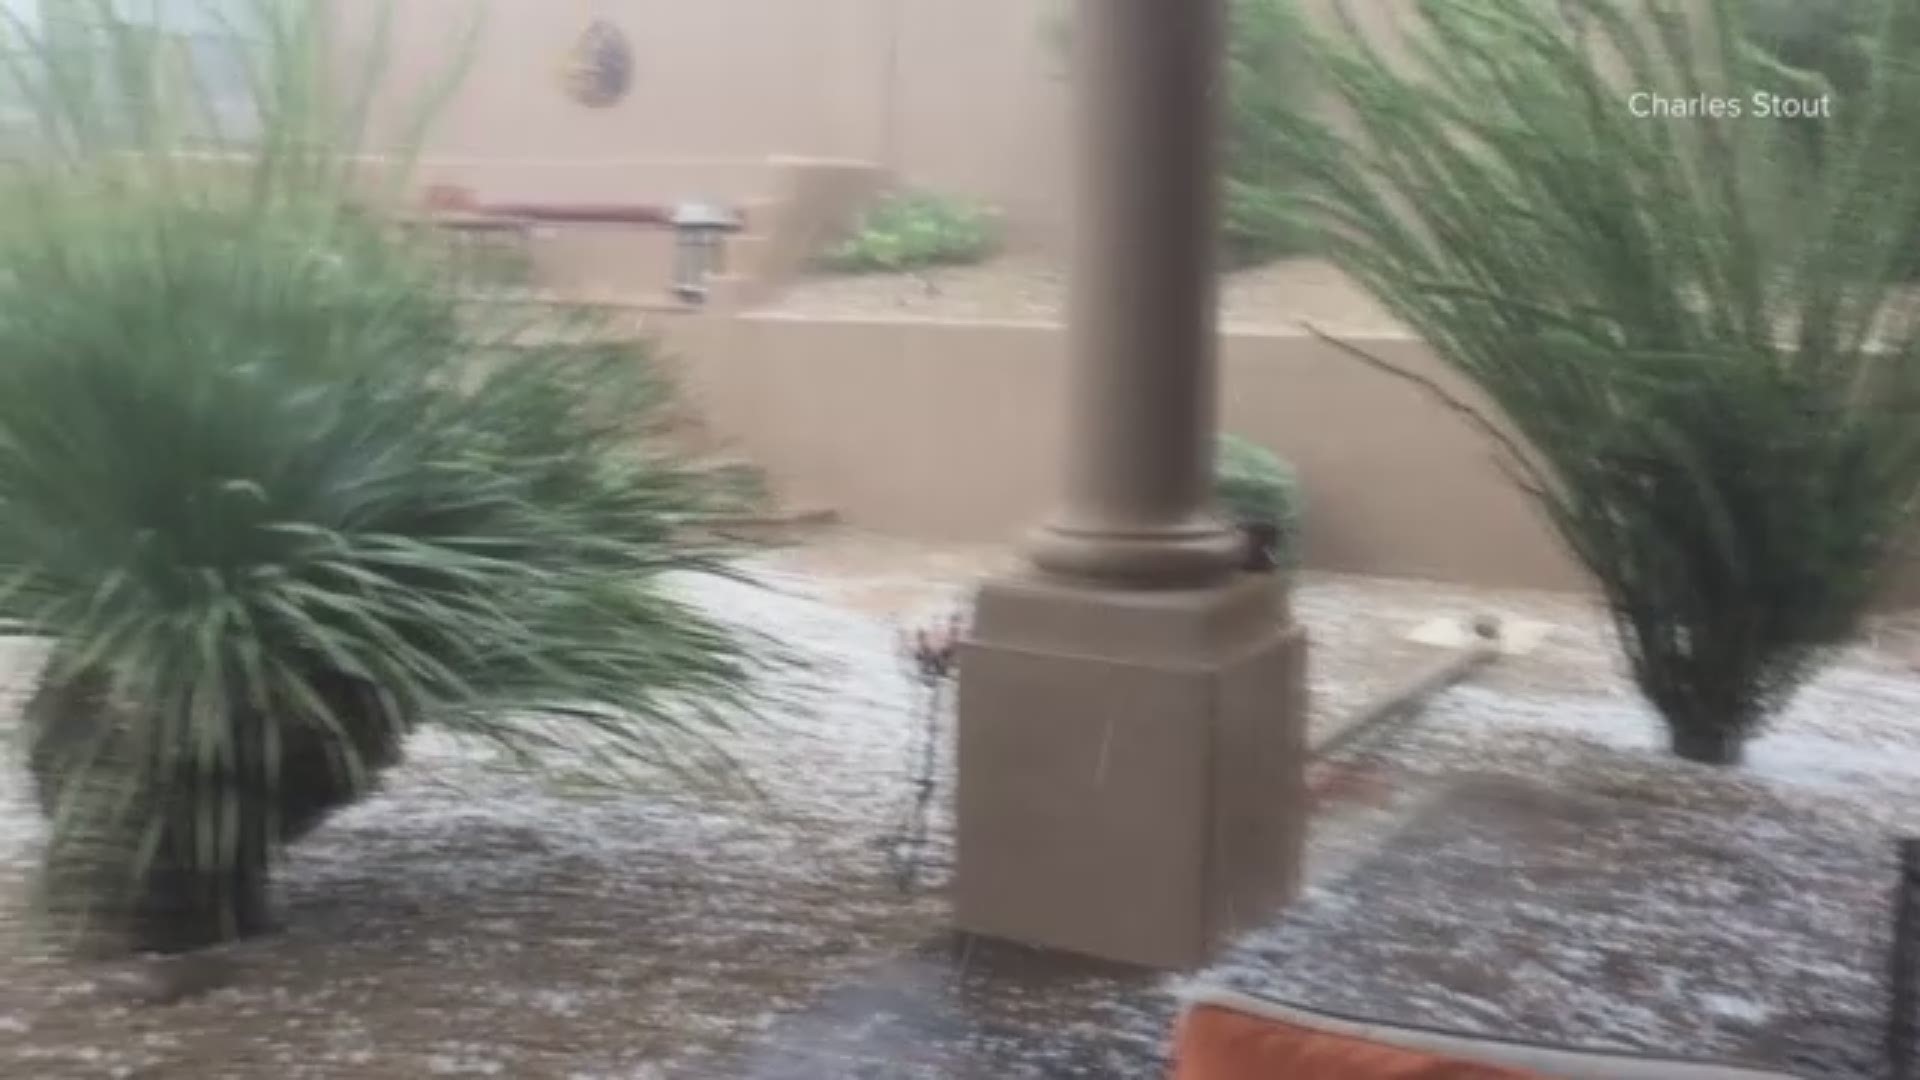 Viewer Charles Stout shared this video of rain and hail slamming north Scottsdale Oct. 23, 2018.